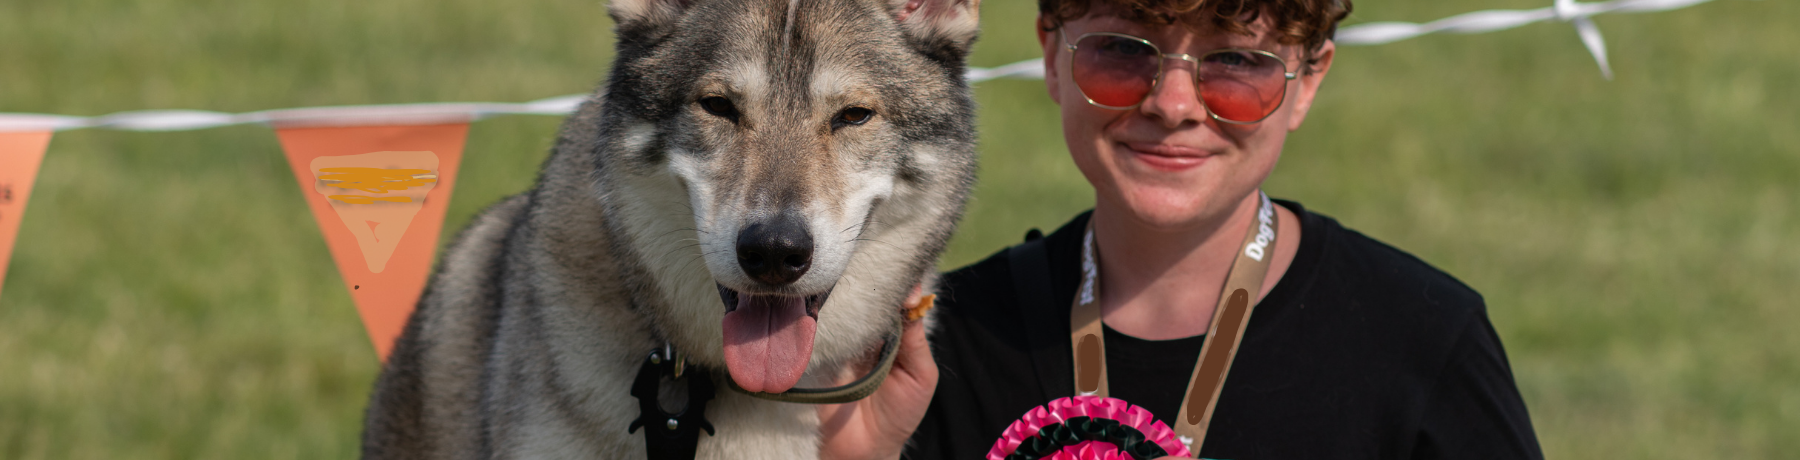 What’s New for Fun Dog Show at DogFest? image